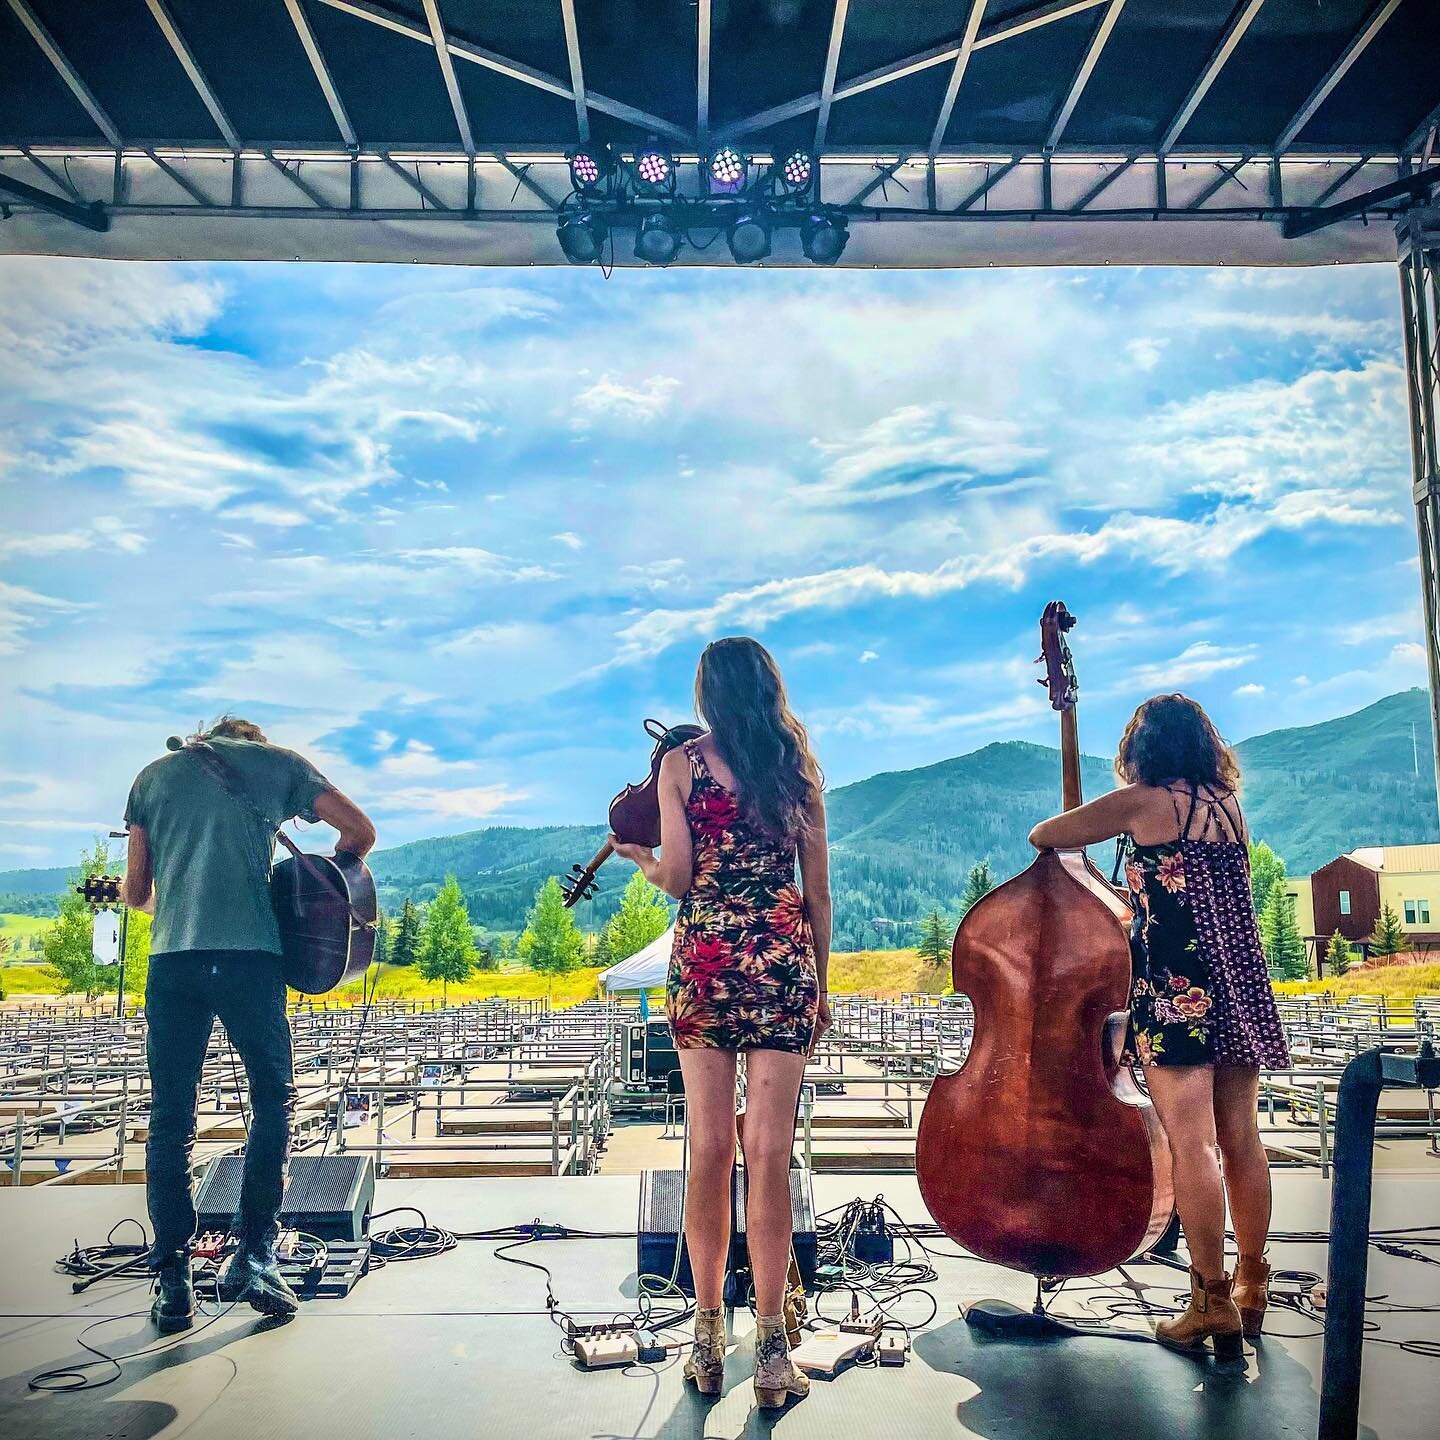 Taking in the incredible beauty during sound check at Strings Music Pavilion in Steamboat Springs!

Thank you so much to all of the wonderful people who attended and thank you to the staff for taking treating us with so much care and kindness. 

Toni